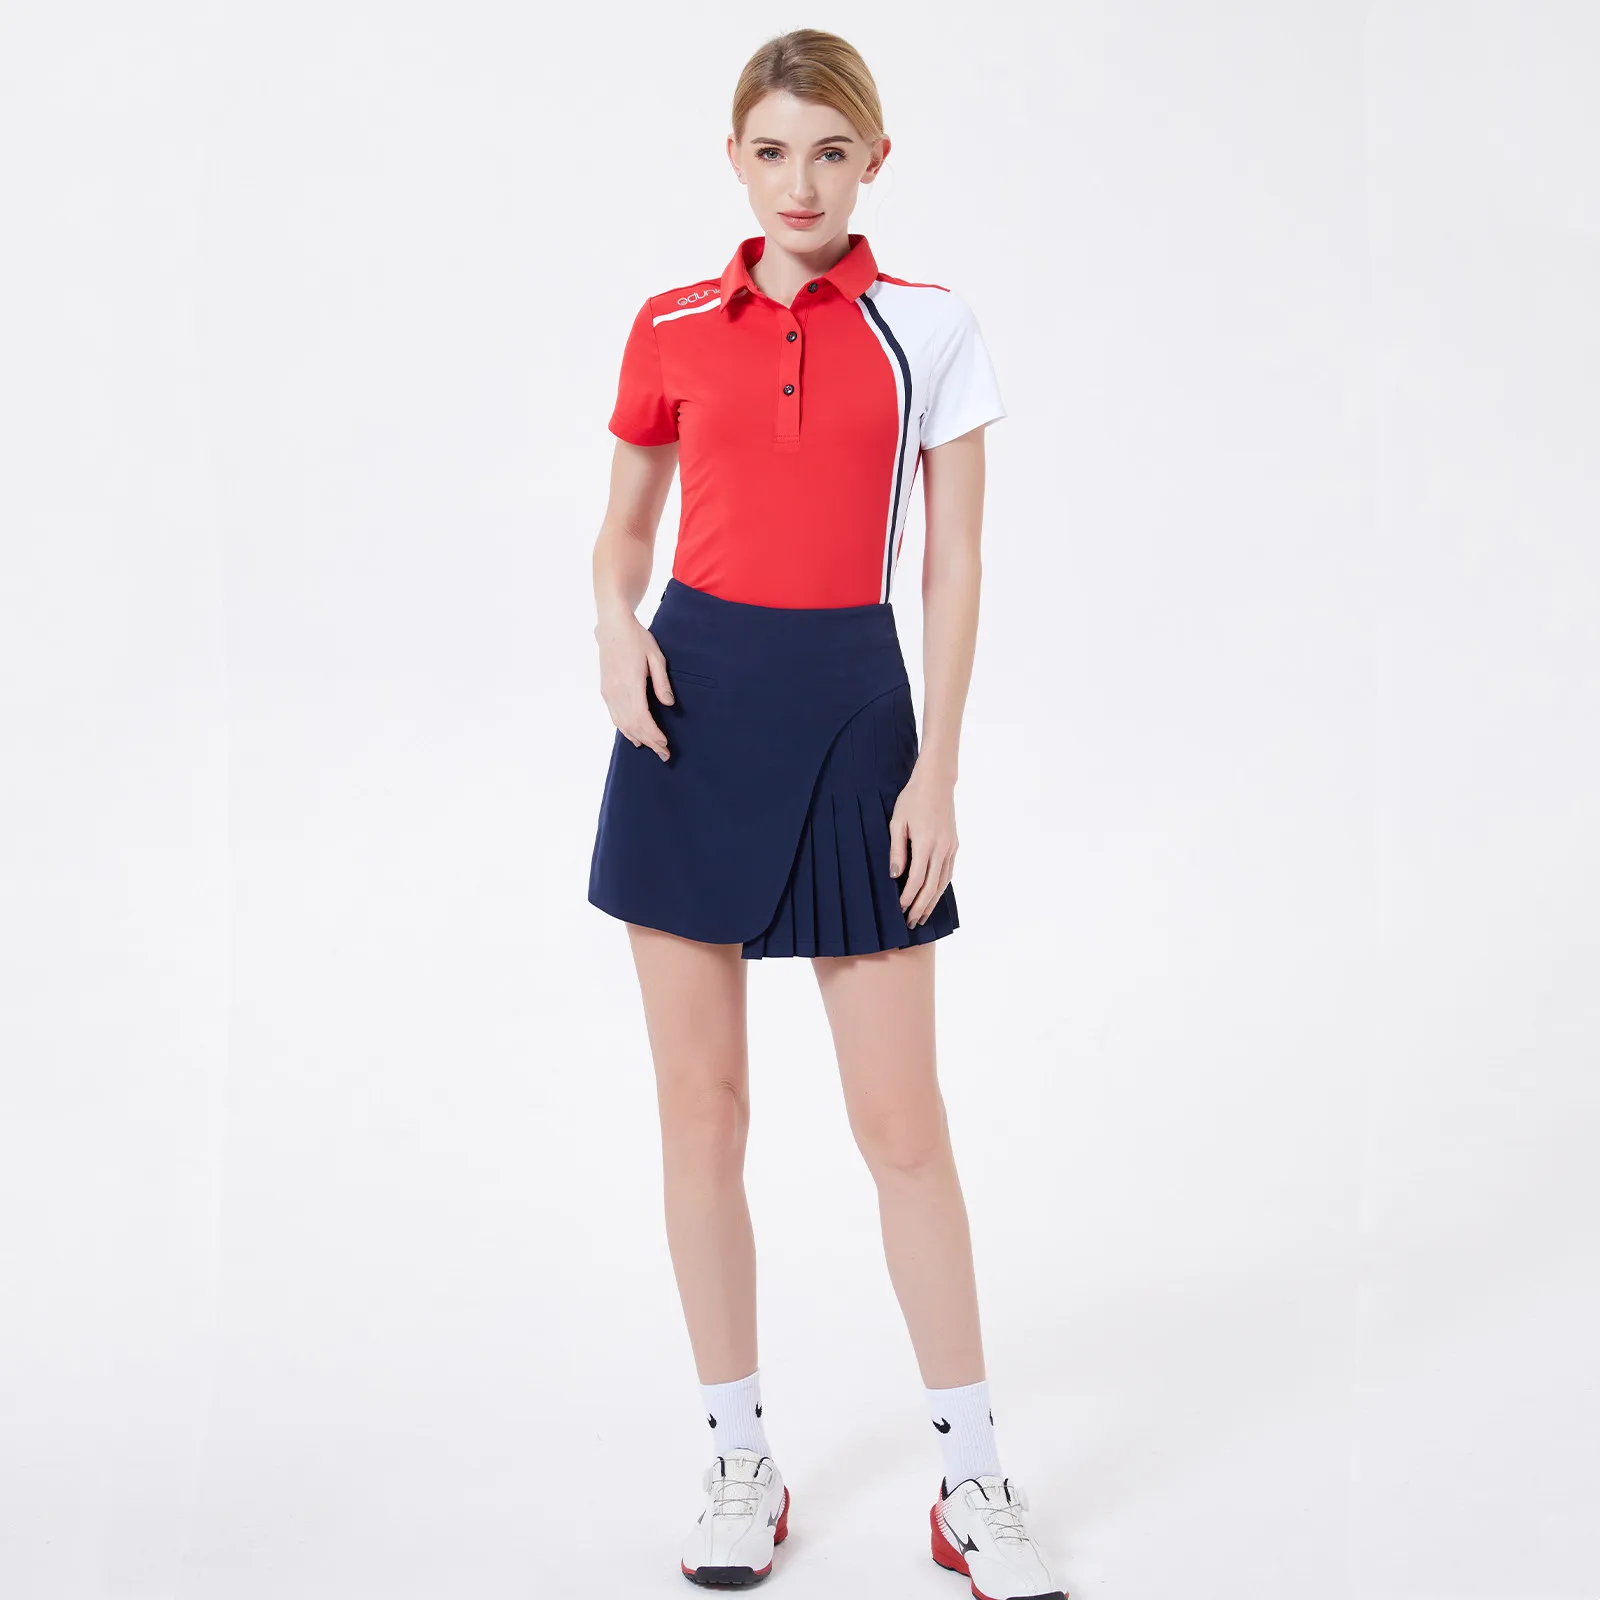 Women's Active Athletic Skorts Exercise Skirt With Pocket For Tennis Golf  Sport Workout Built-in Shorts With Pocket Design - Buy Women's Active Athletic  Skorts,Oclunlc Skirts,Latest Design Golf Skirt Product on Alibaba.com